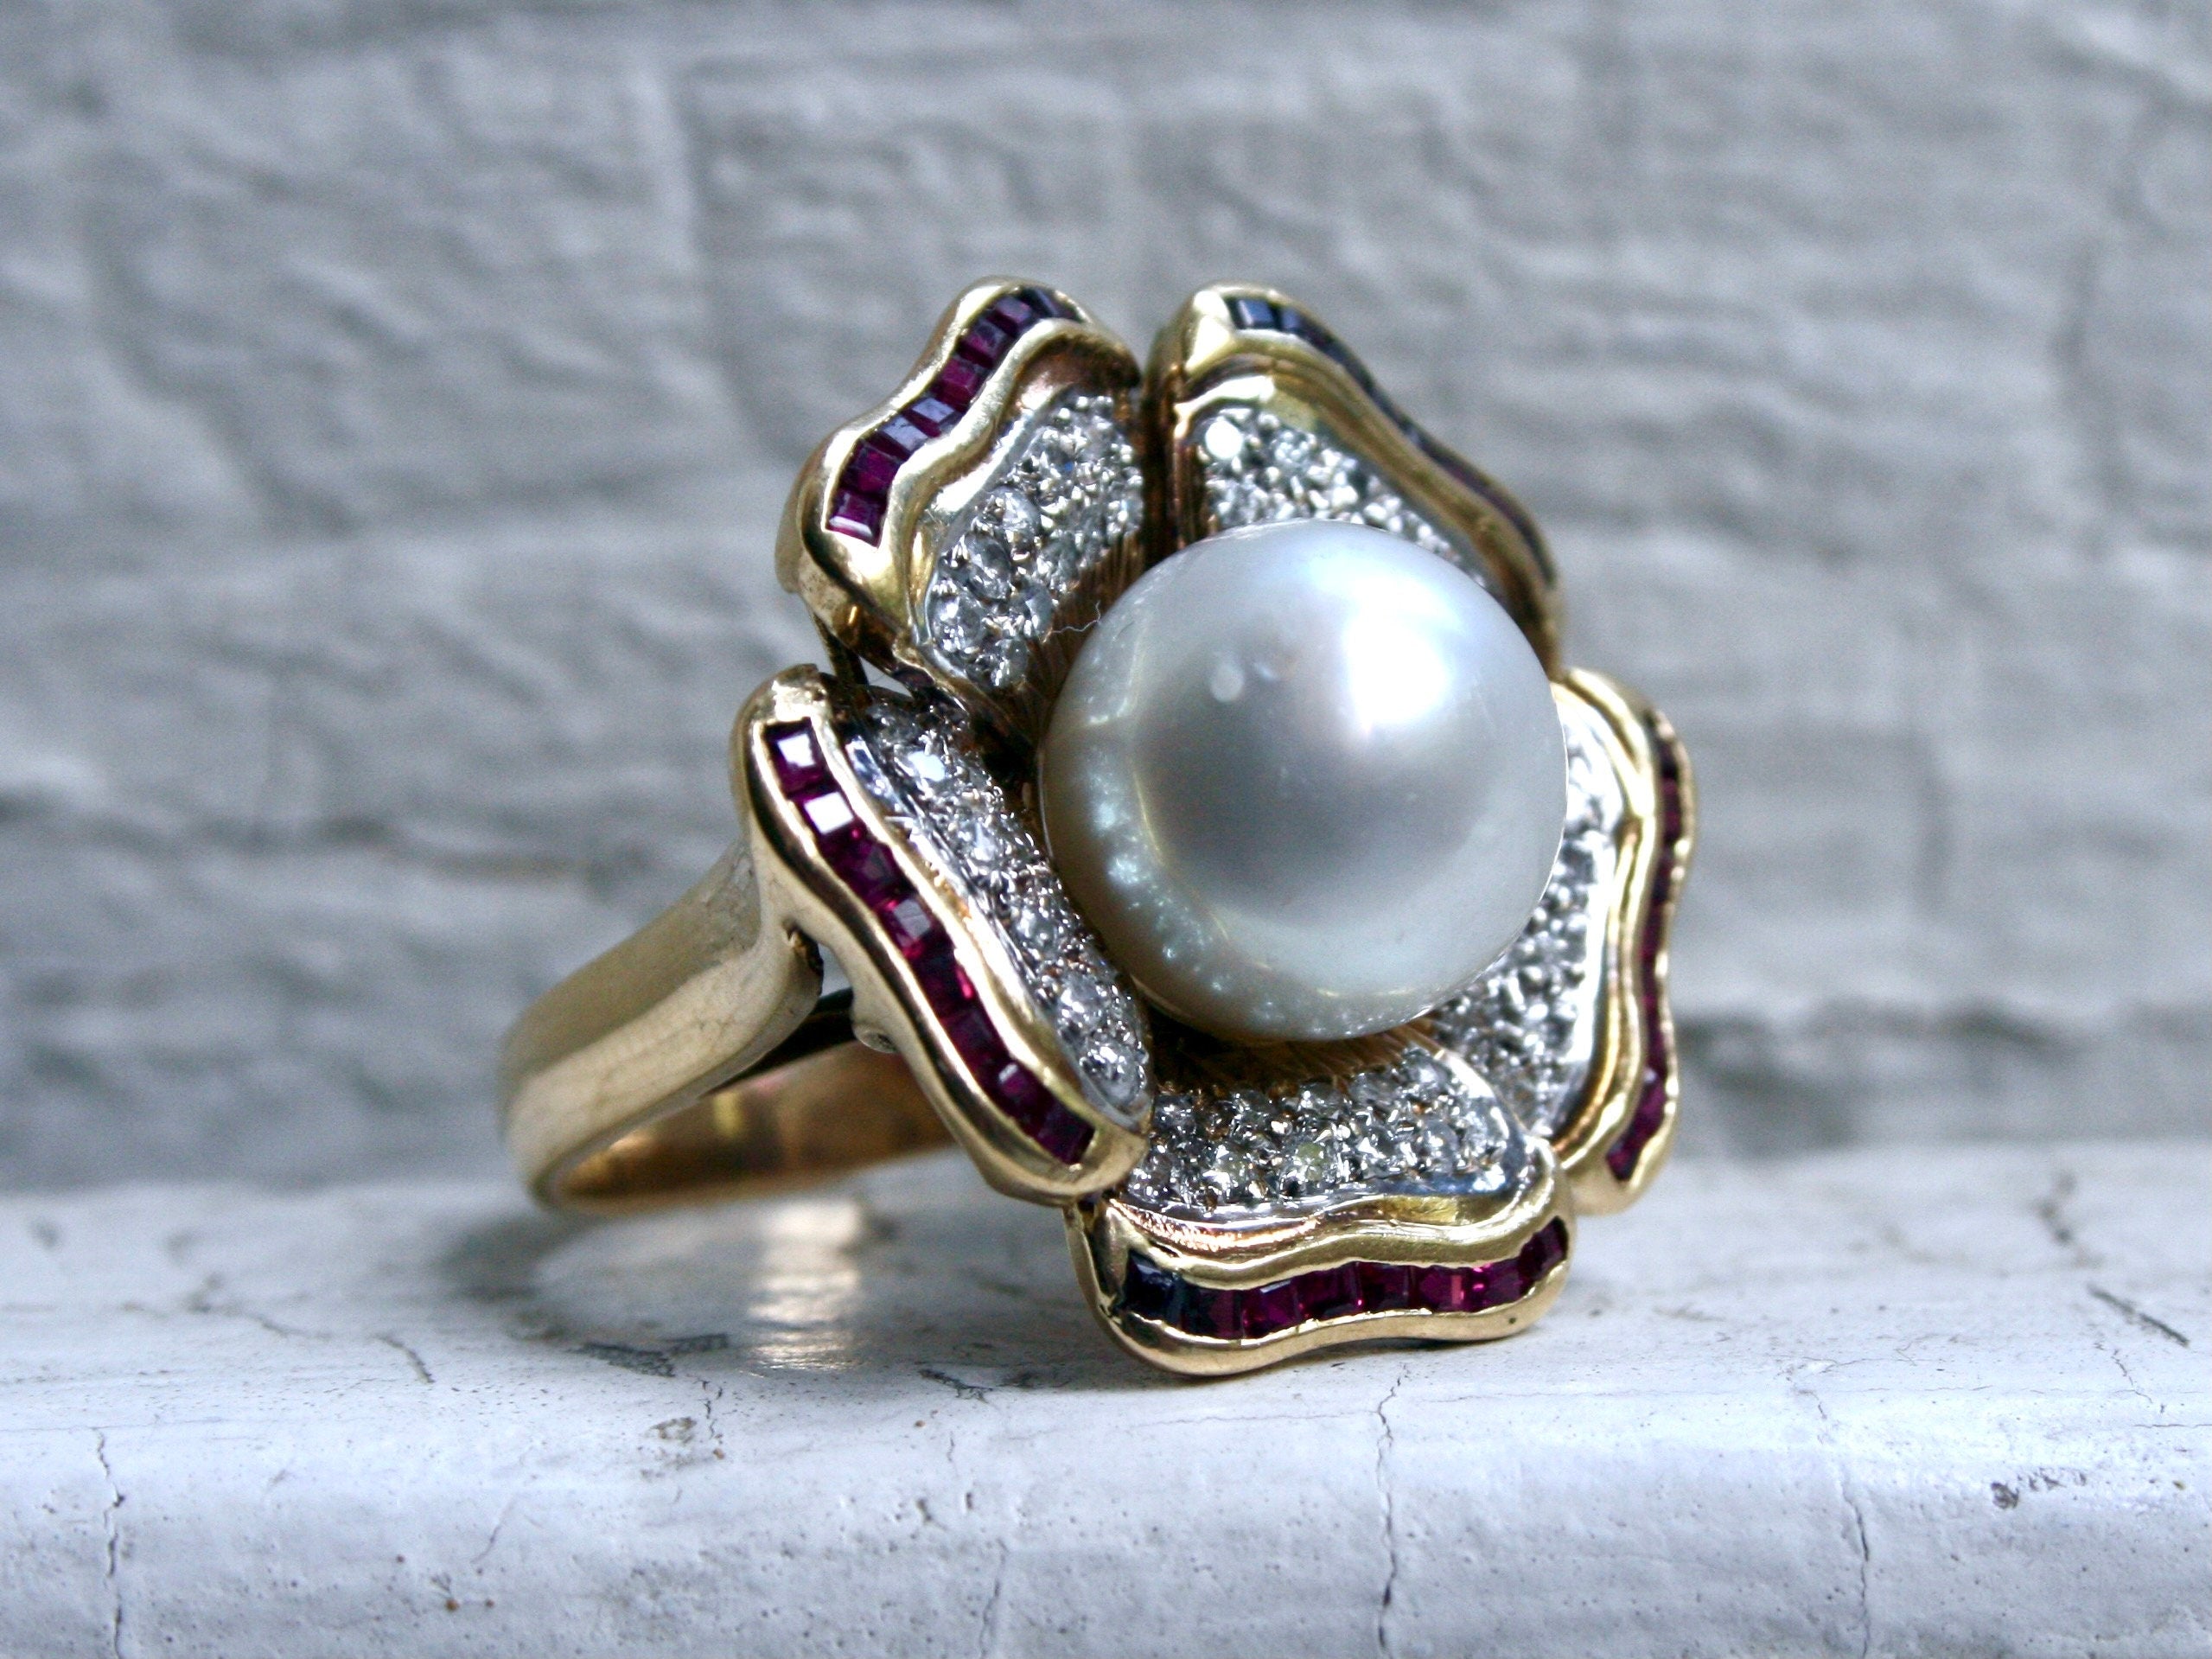 Gorgeous Vintage 18K Yellow Gold Diamond, Ruby, and South Sea Pearl Flower Cluster Ring.